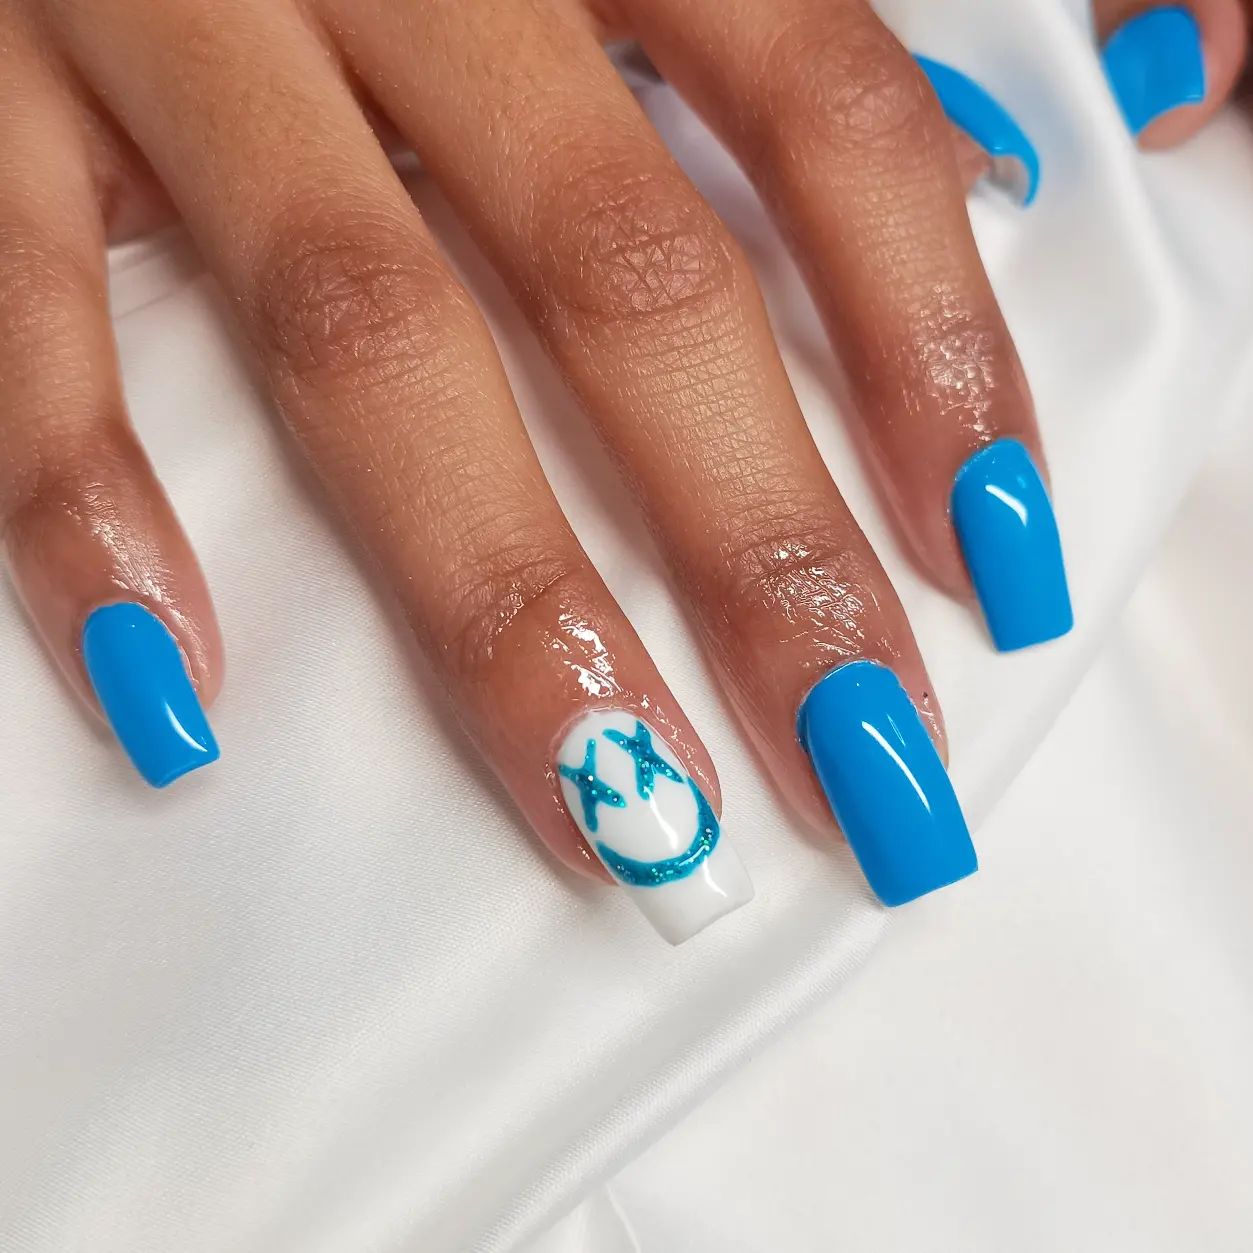 This neon blue is quite electric! A smiley face with a glittered blue nail polish is nice nail design to try.